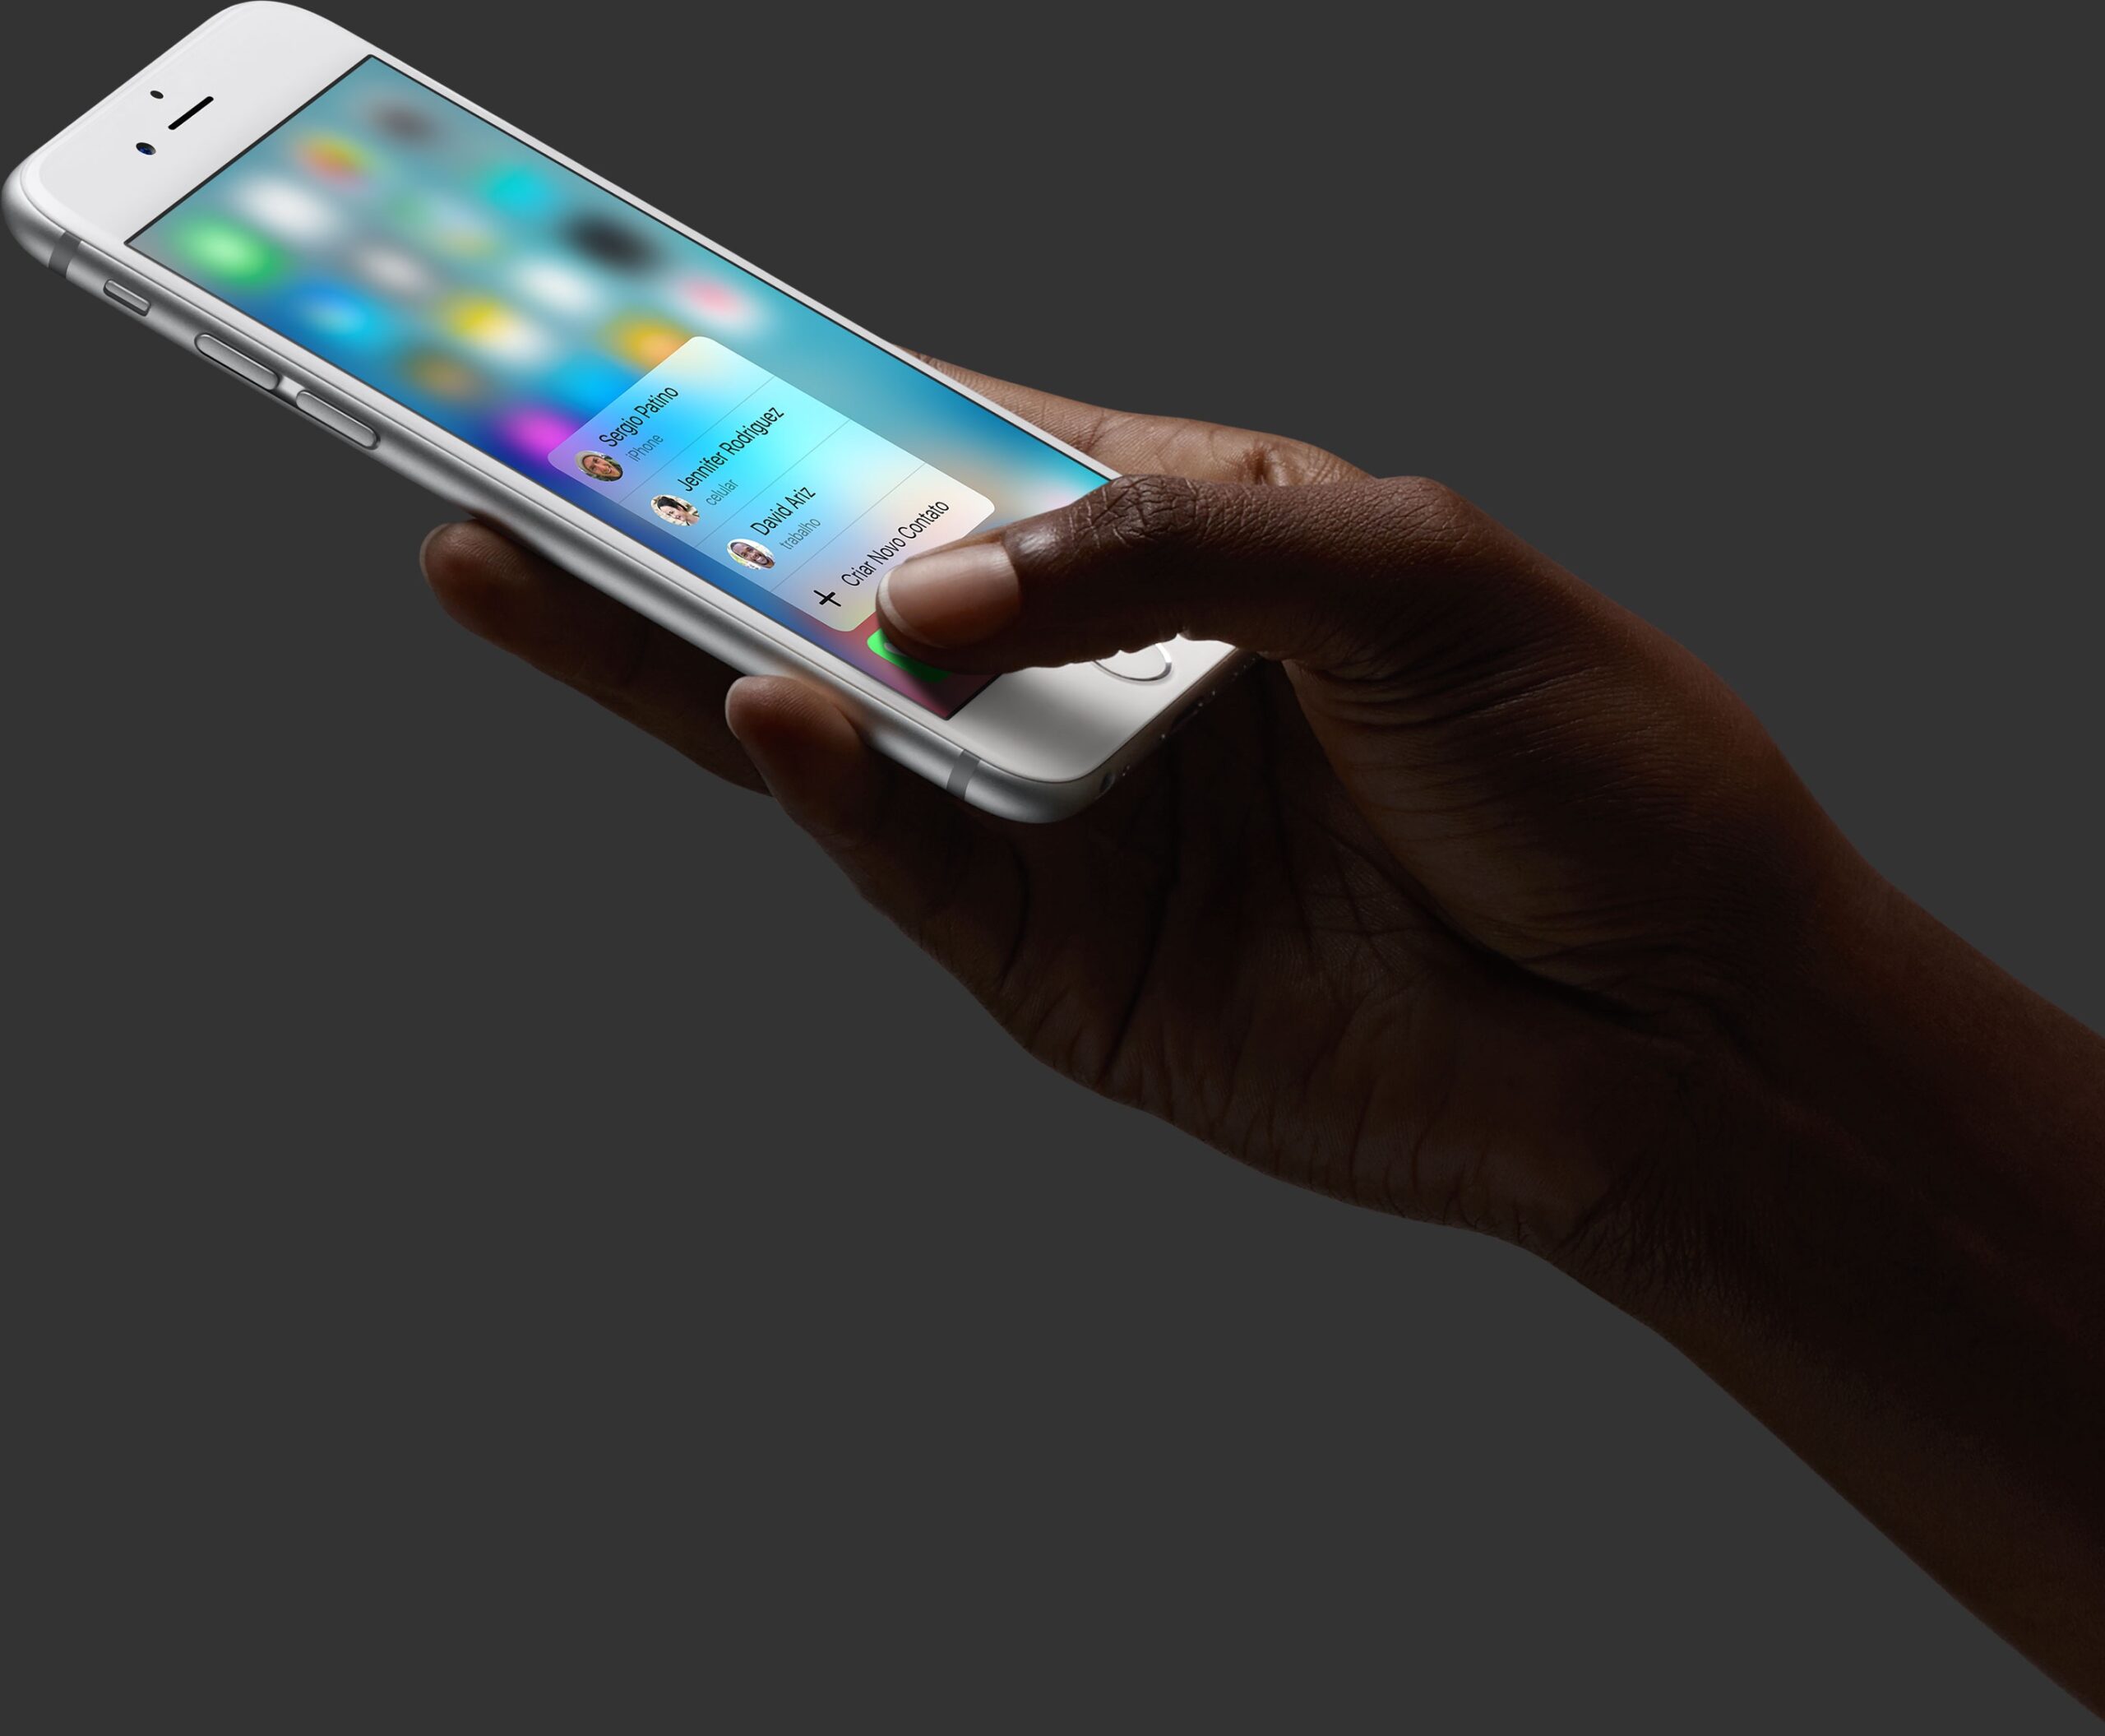 Most protective films will continue to function on the iPhone 6s 3D Touch screen